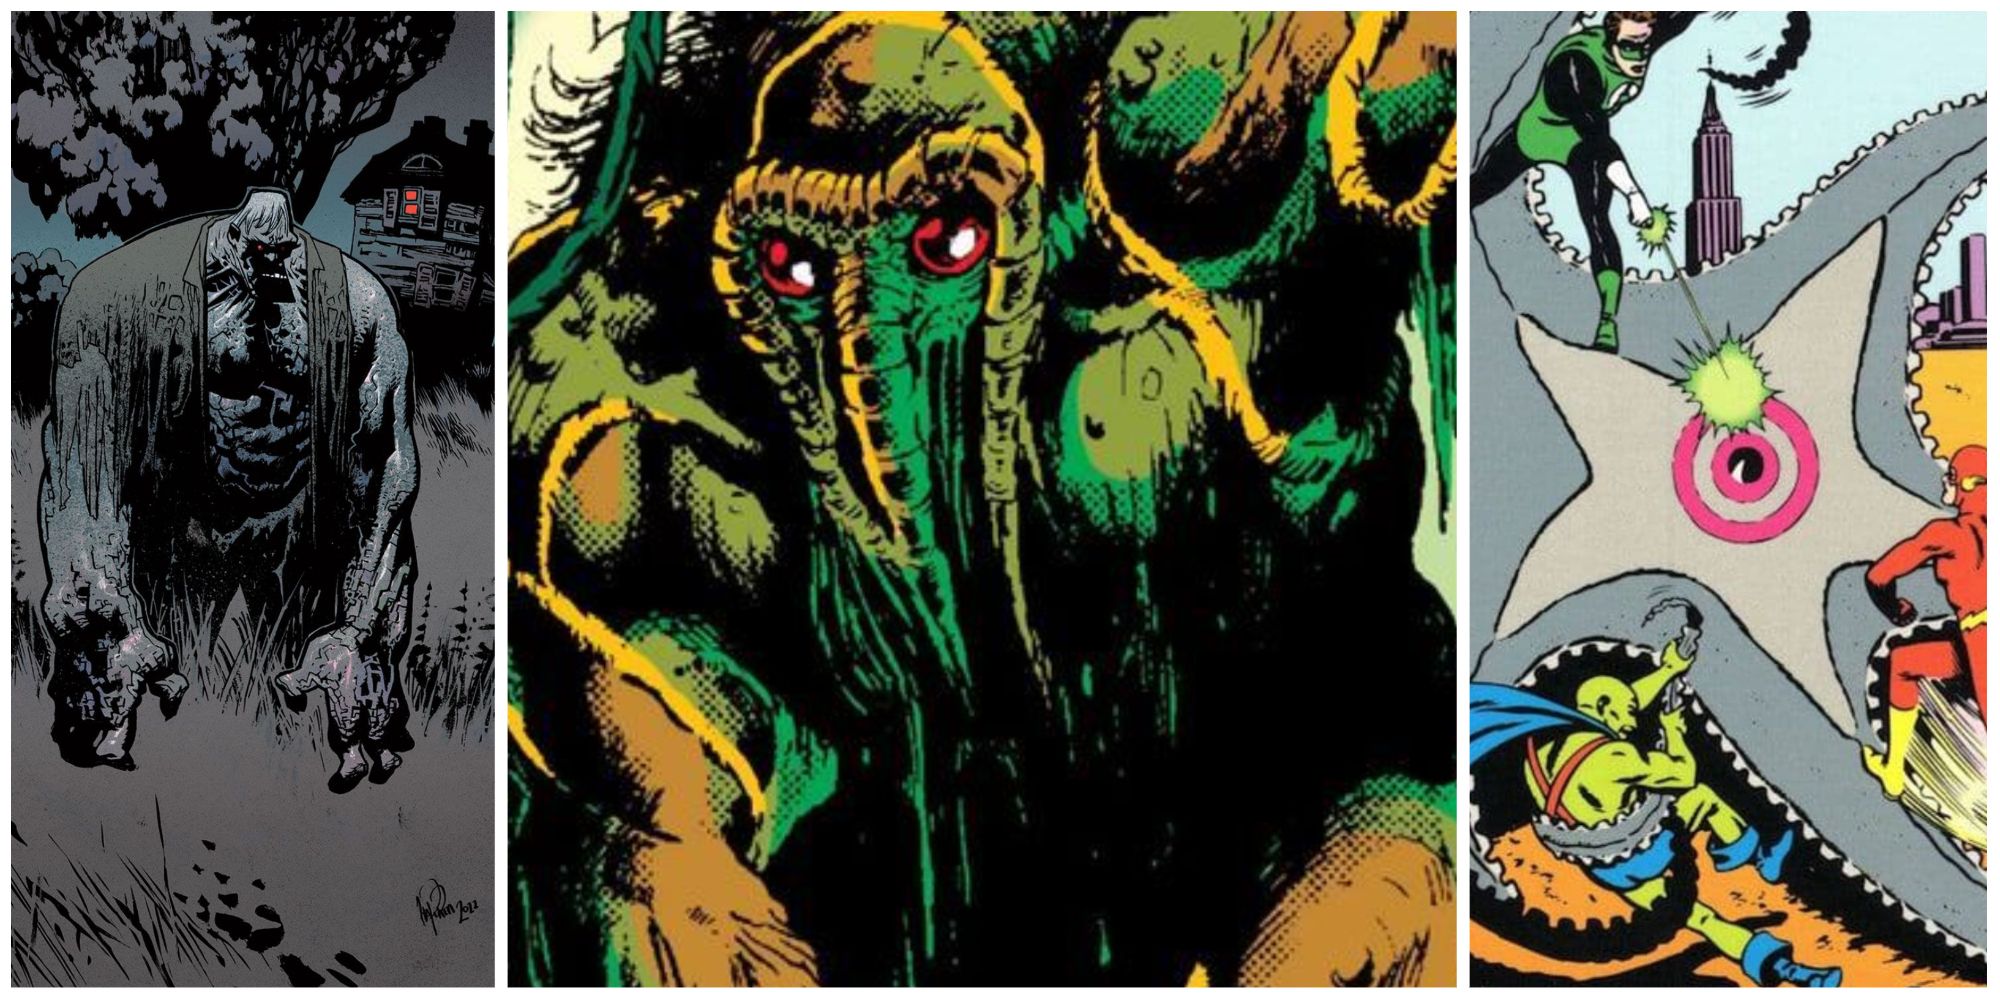 Comic Book Monsters. Split image of Man-Thing, Starro, and Solomon Grundy